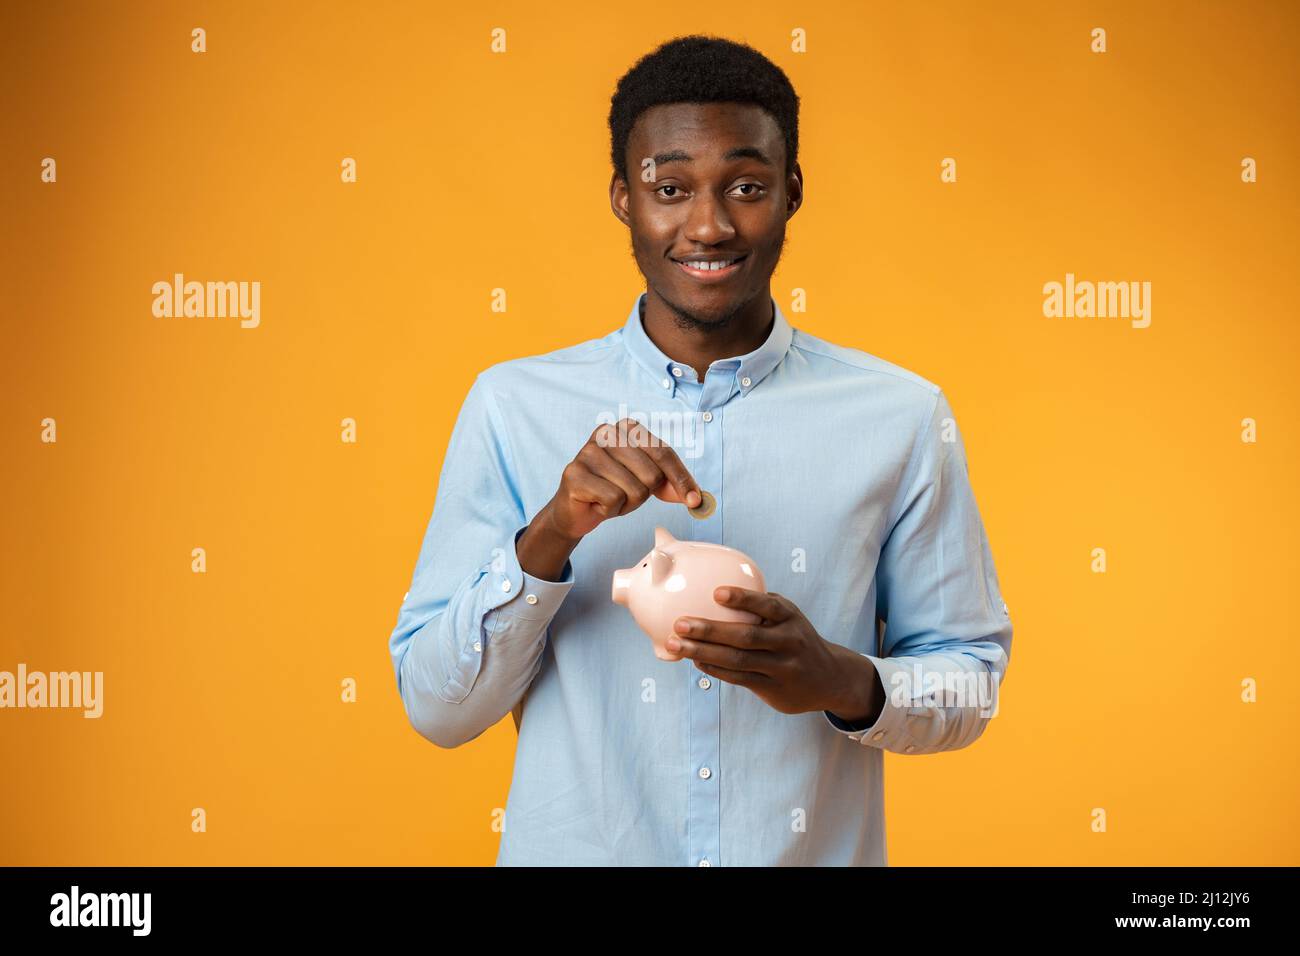 Young african amercian man holding piggy bank over yellow background Stock Photo